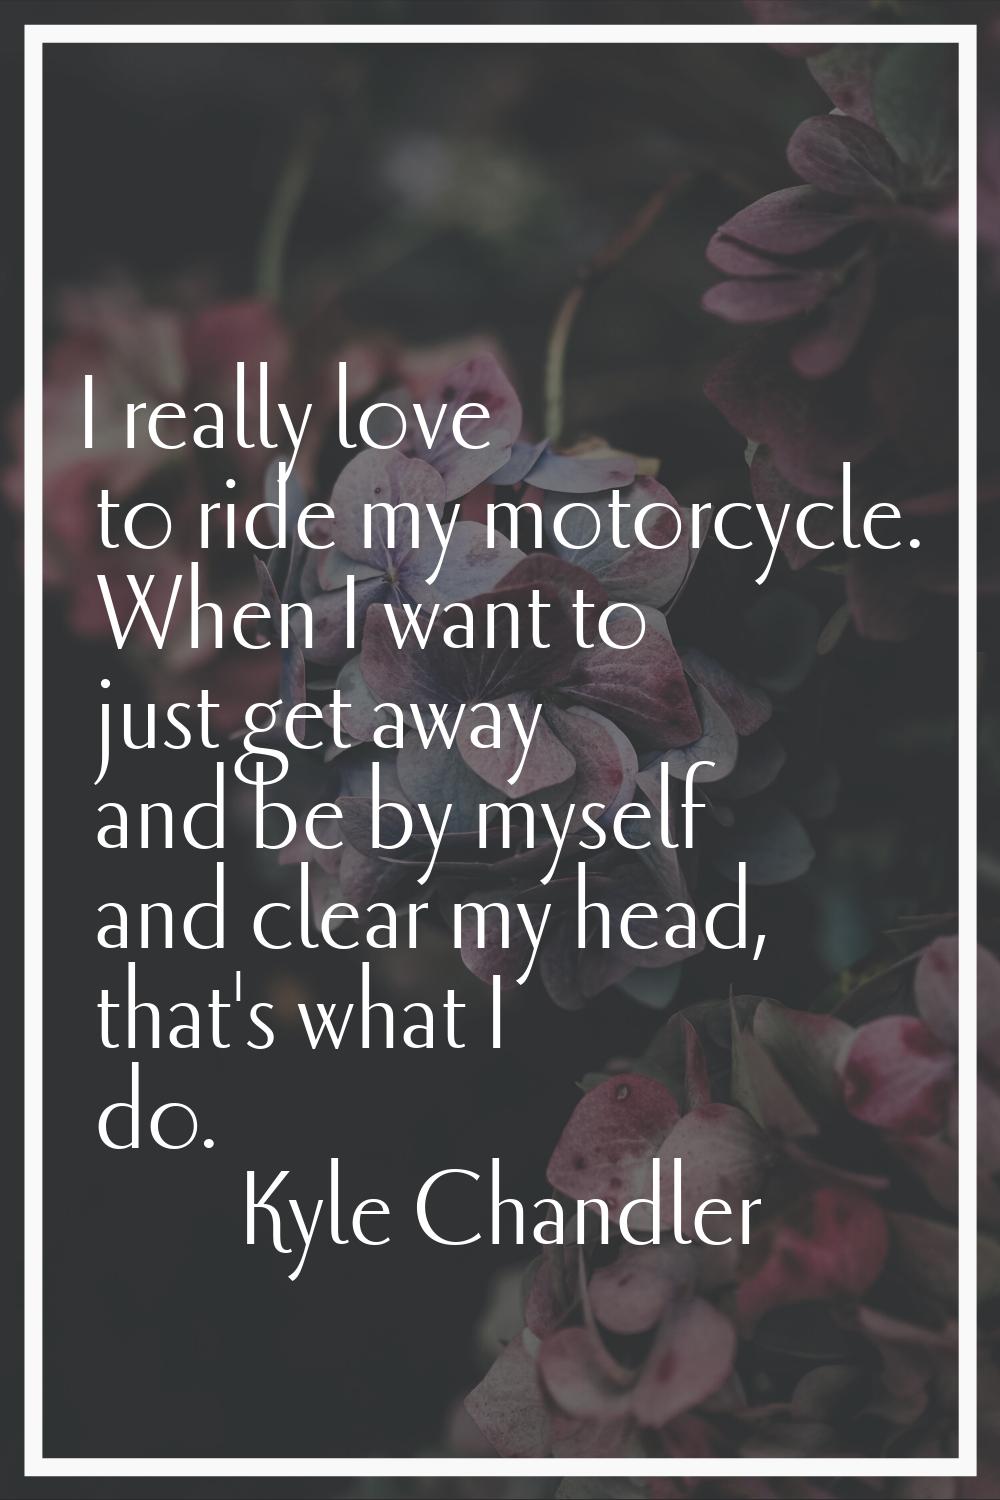 I really love to ride my motorcycle. When I want to just get away and be by myself and clear my hea